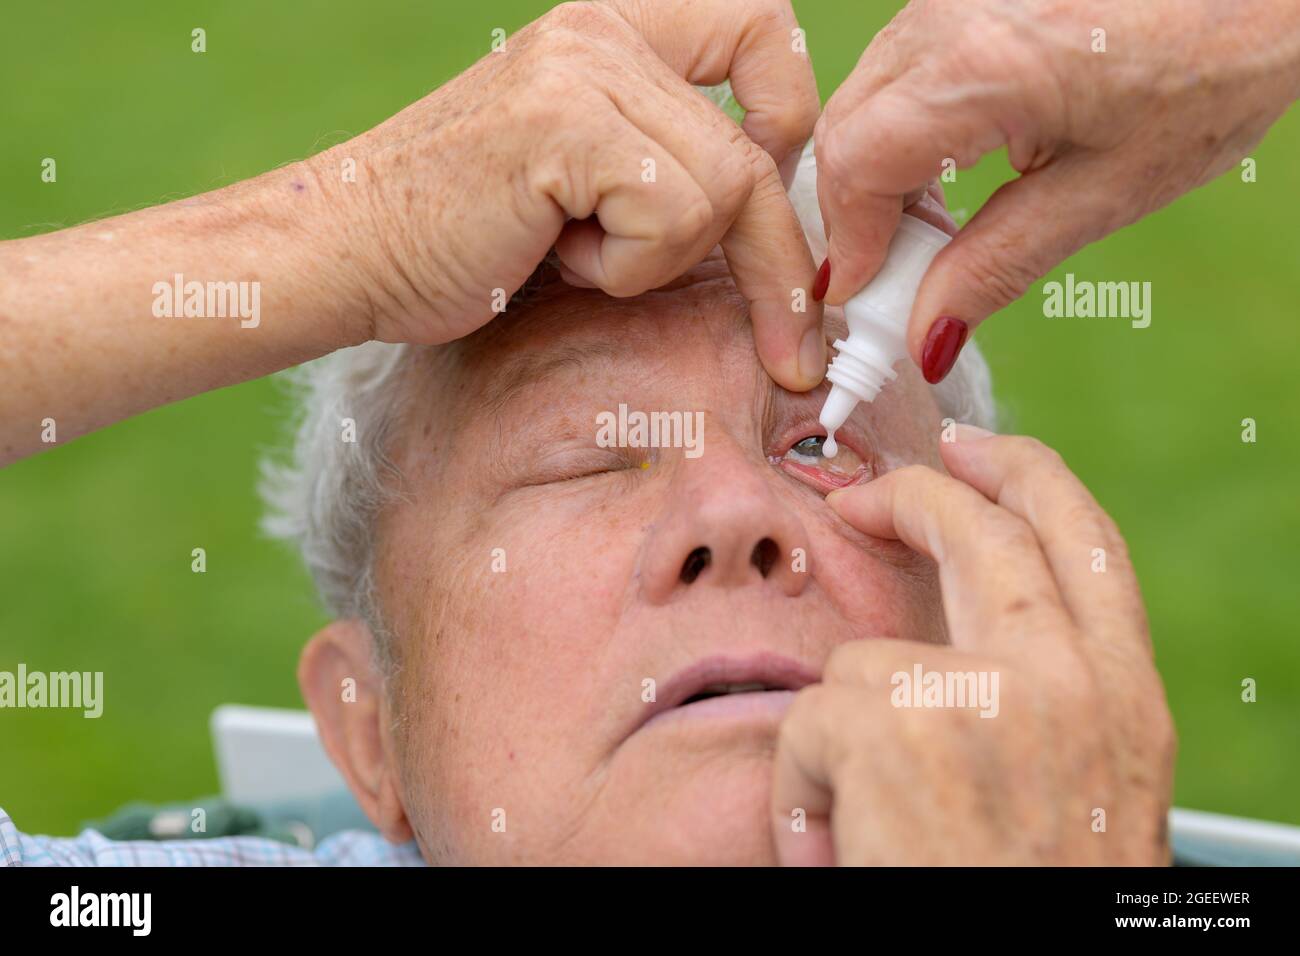 Woman applying eyedrops to the eyes of an elderly man in close up as the drops fall to the lower lid in treatment of an eye disease Stock Photo